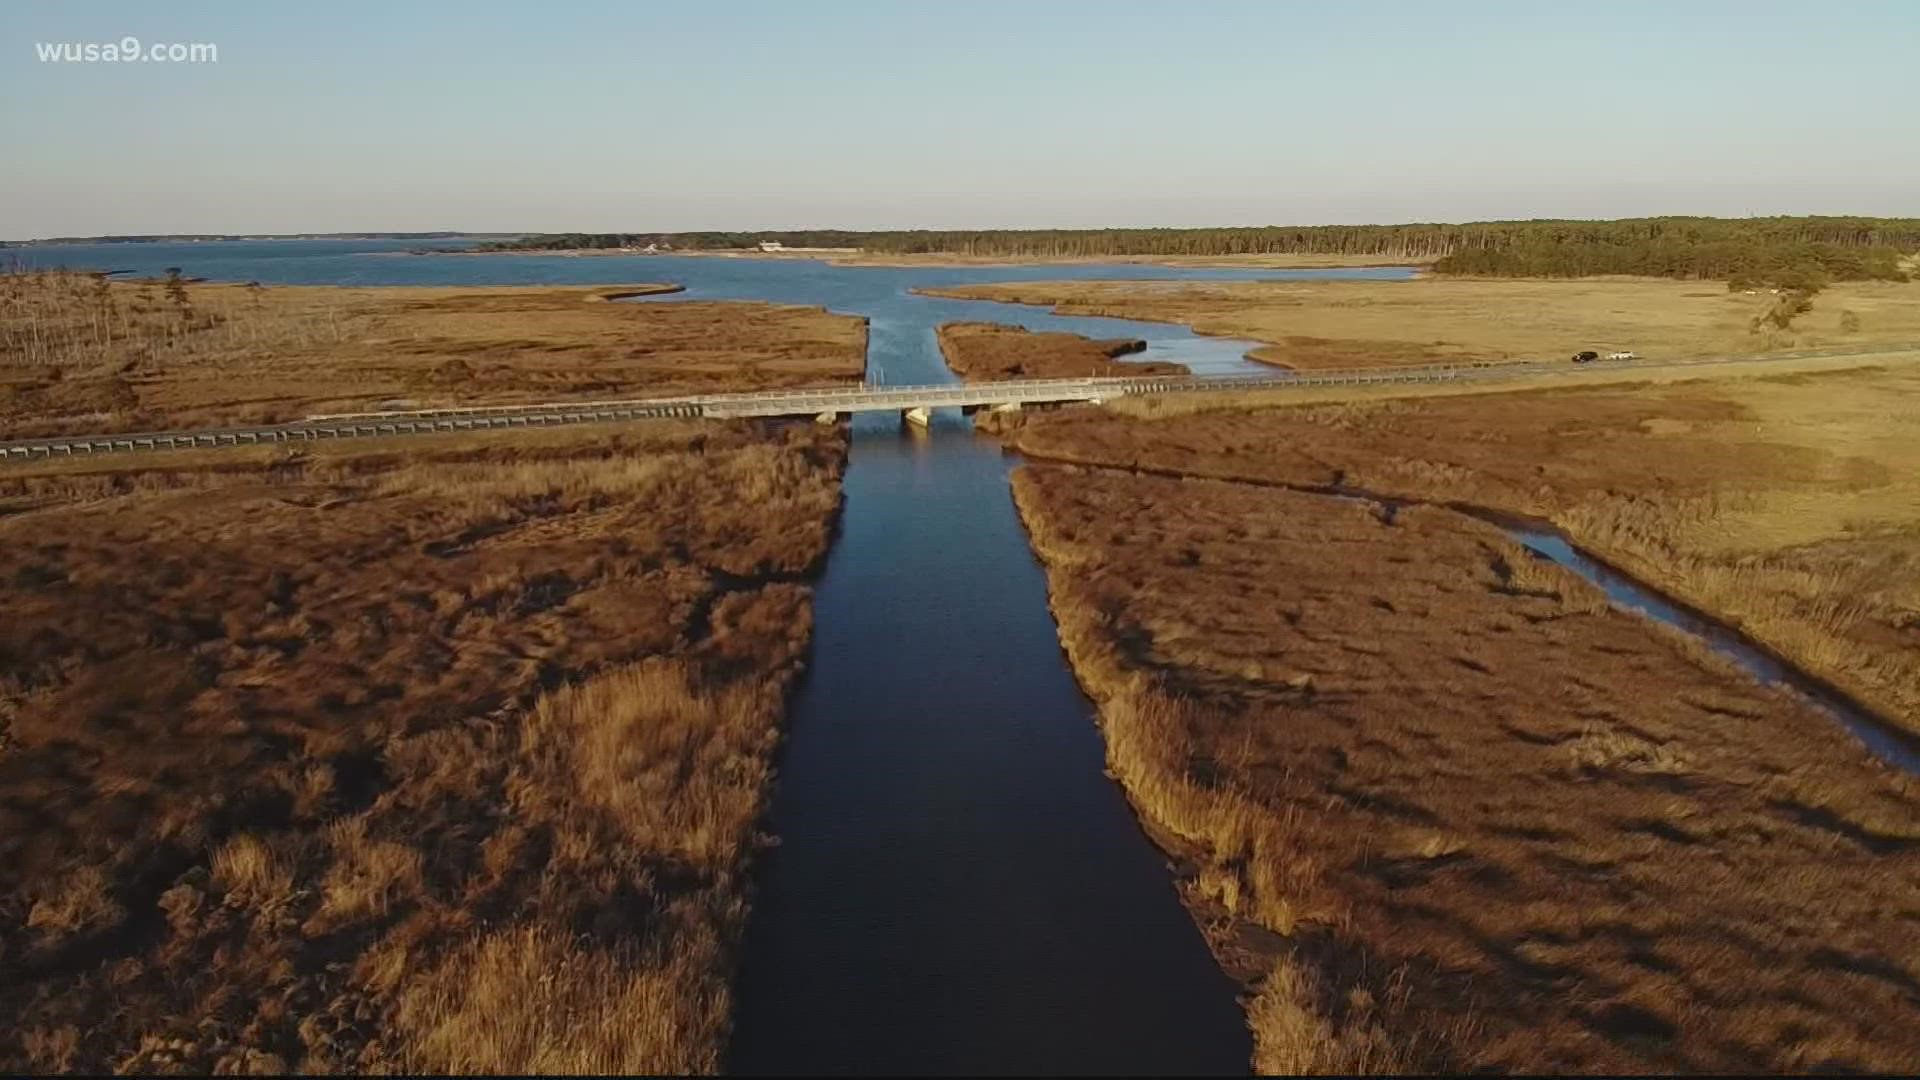 History is being threatened by climate change in Dorchester County, Maryland.